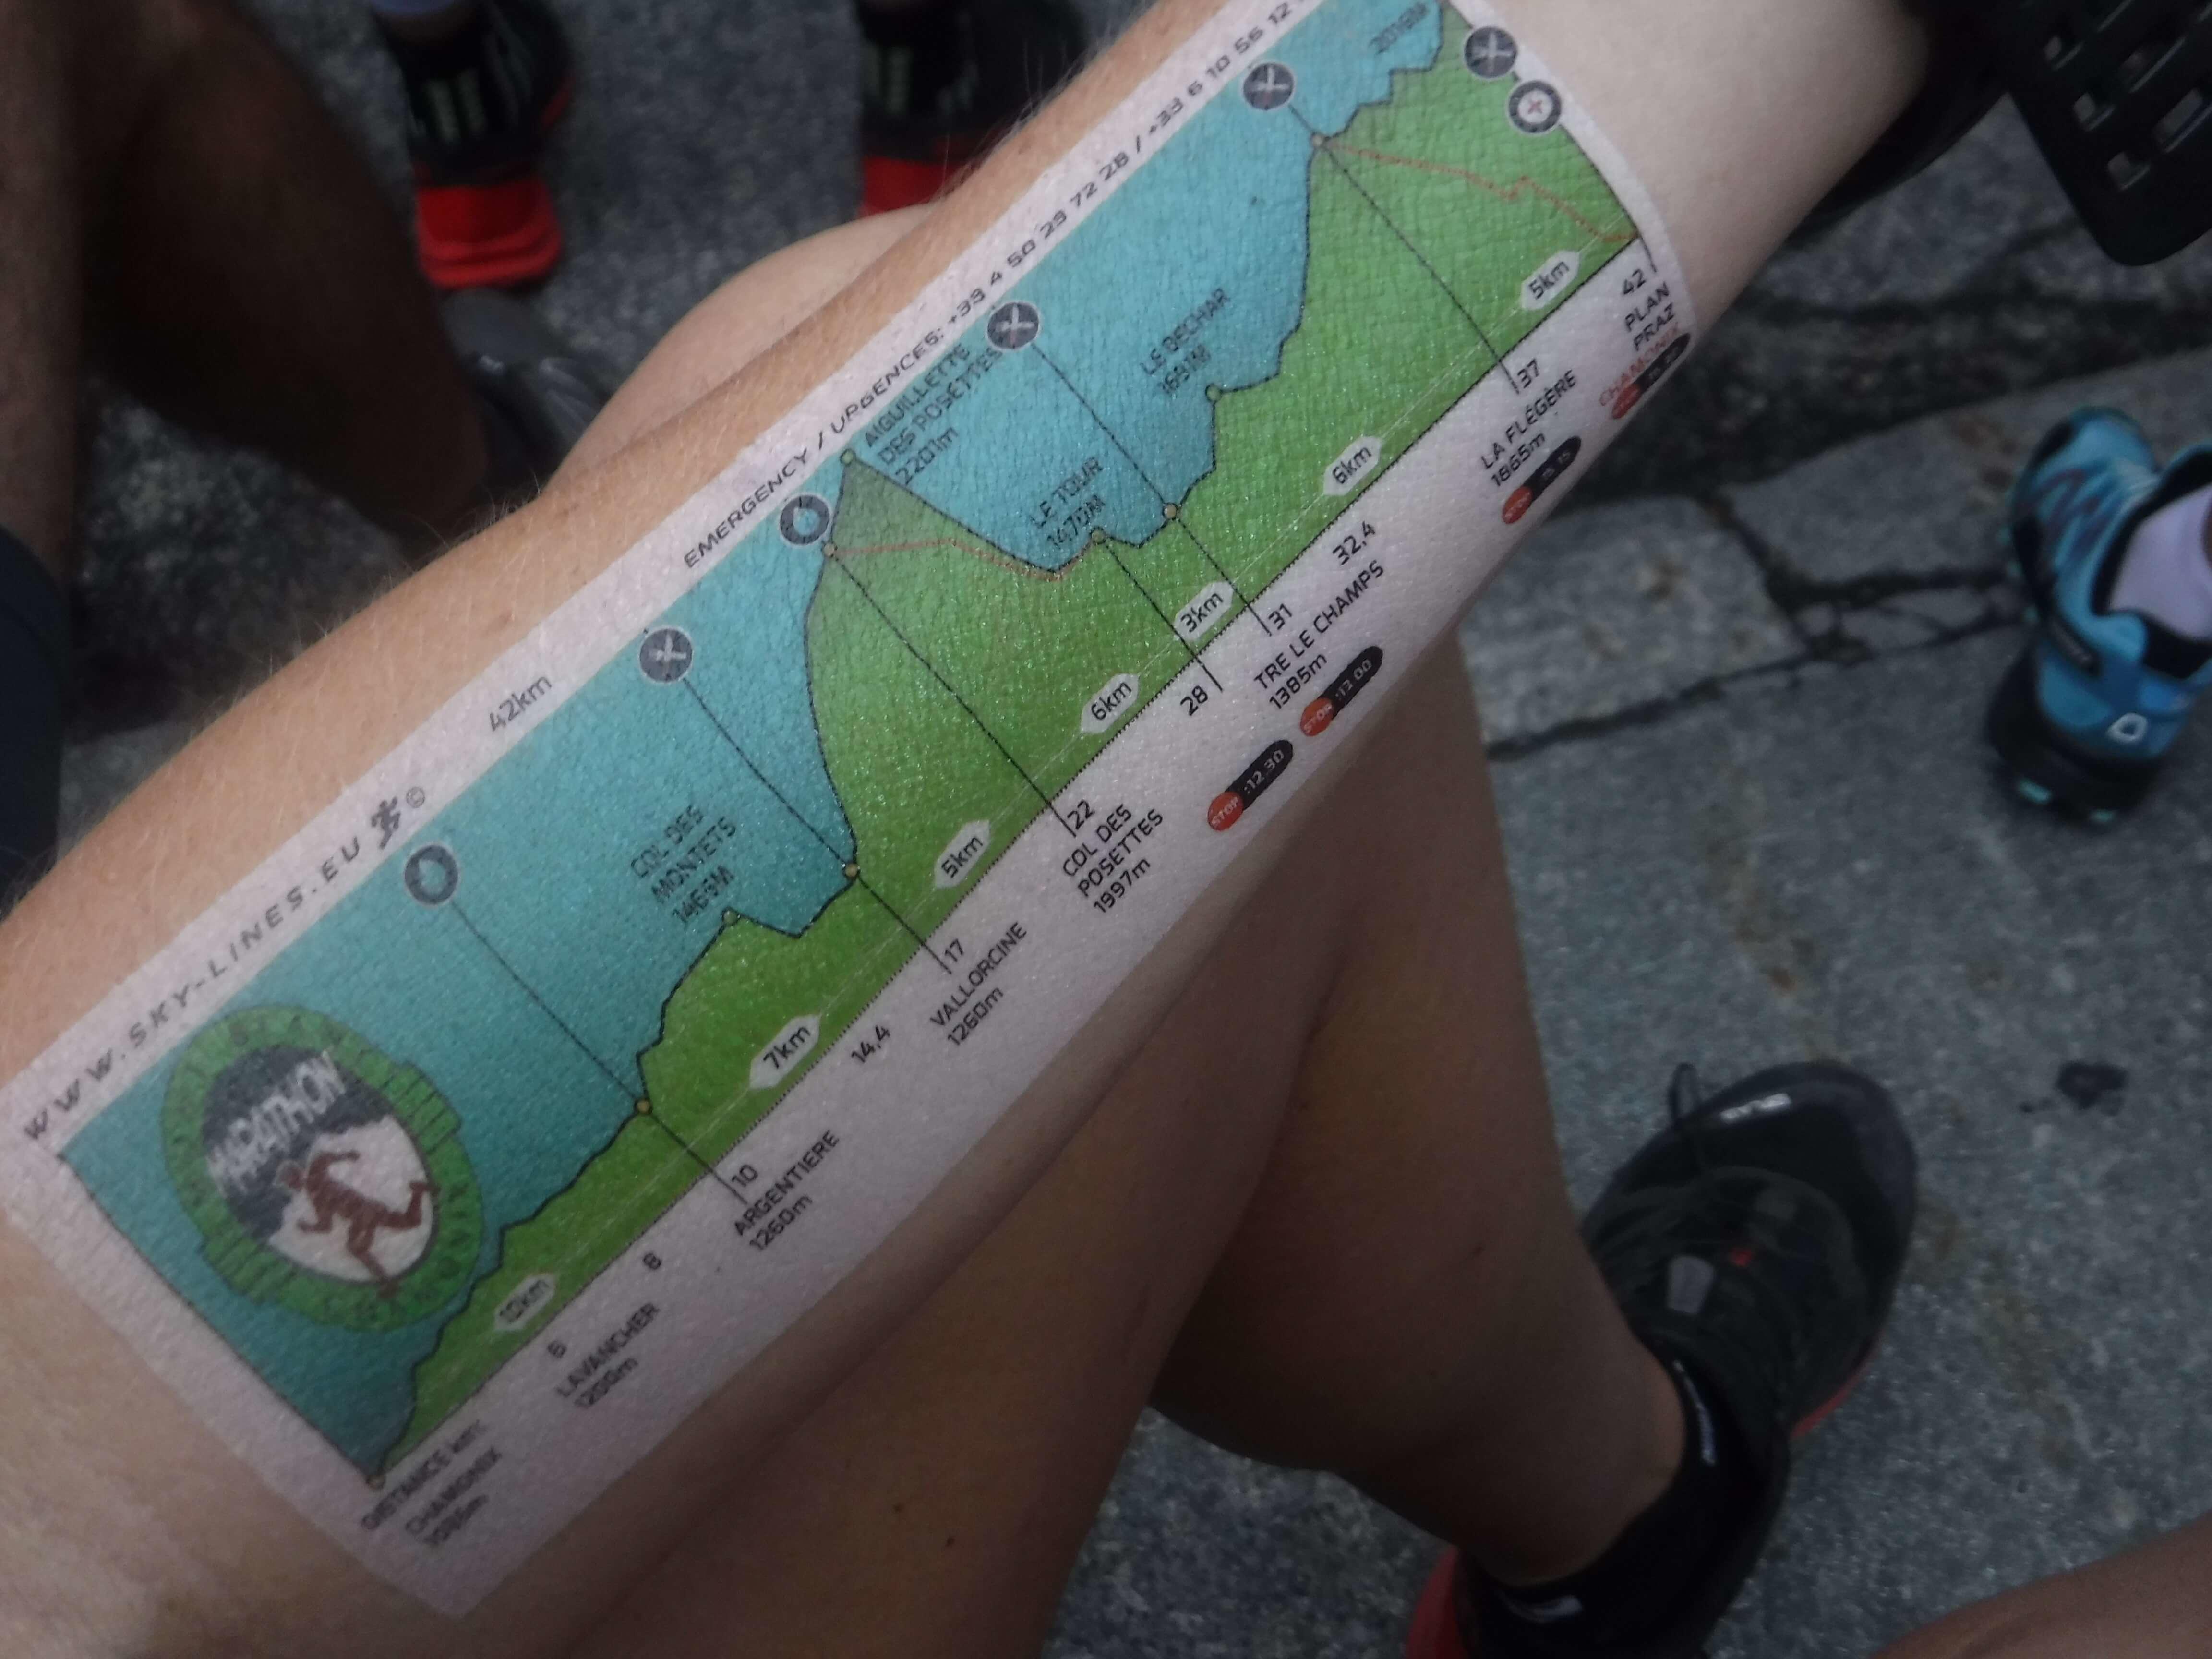 Temporary tattoo with the Mont-Blanc race course